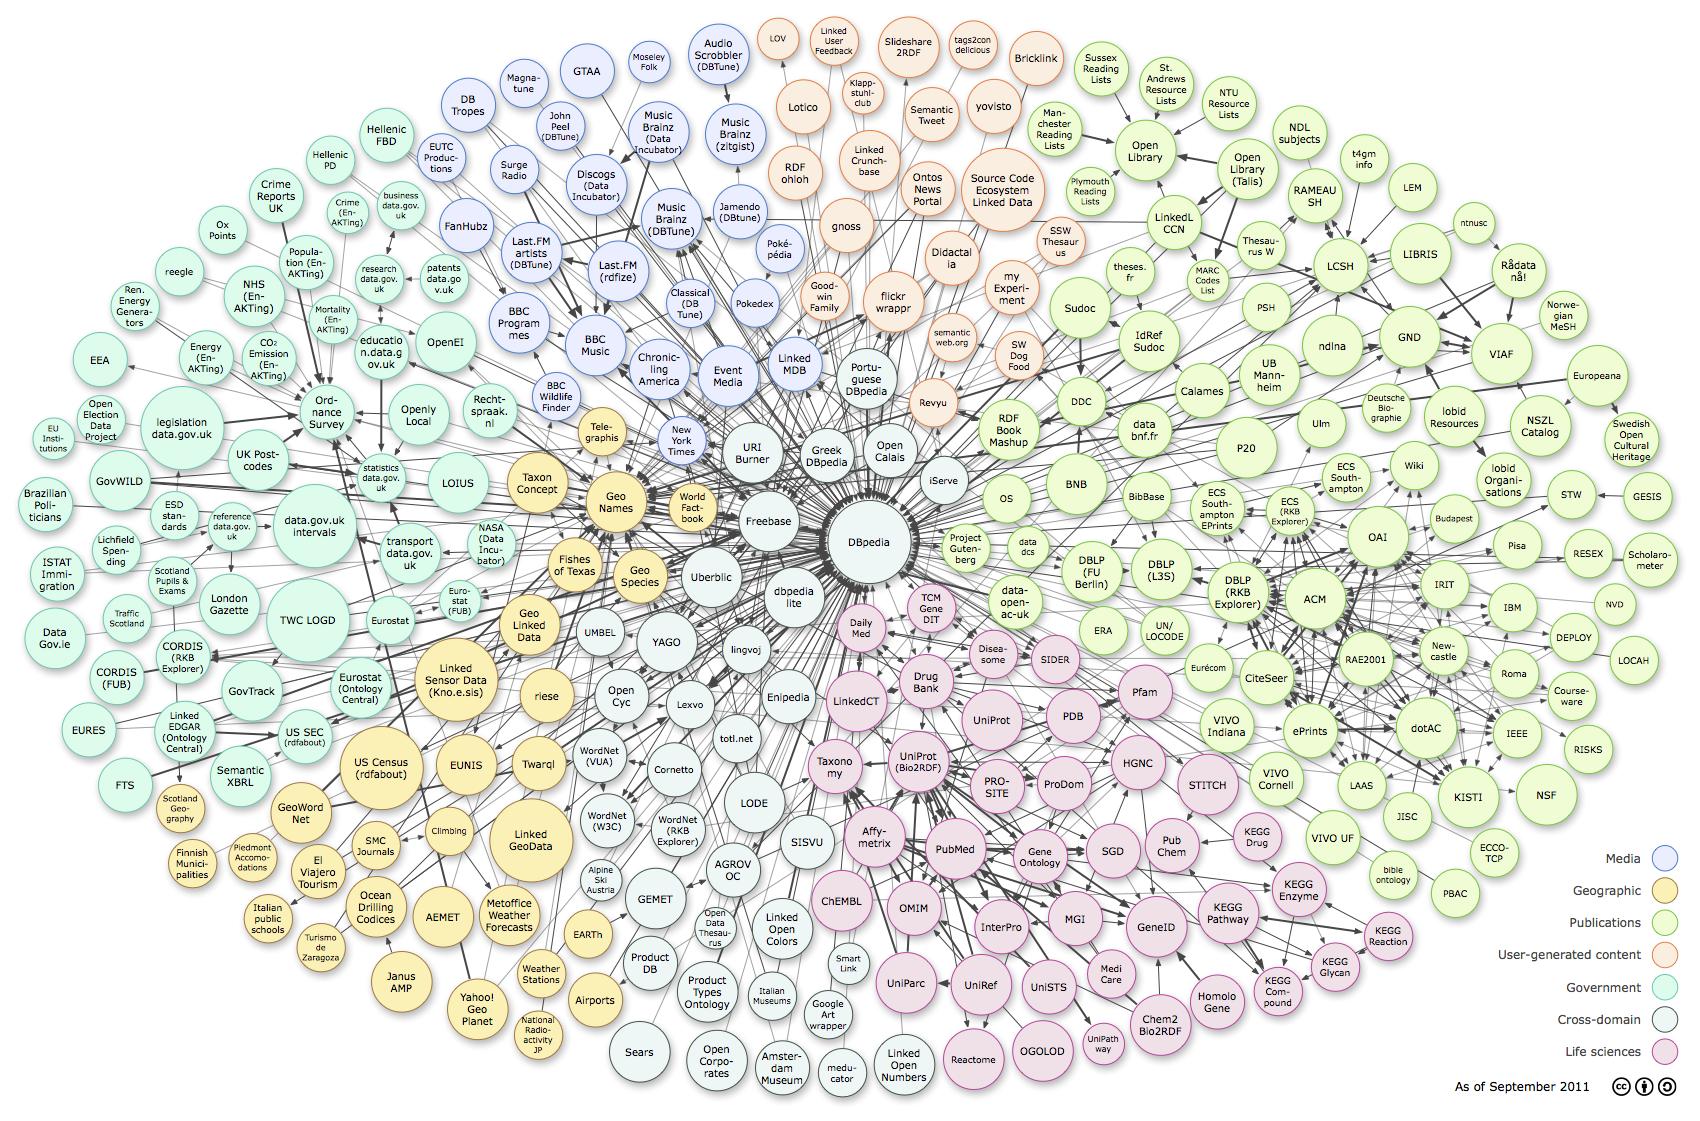 net/state Linking Open Data cloud diagram, by